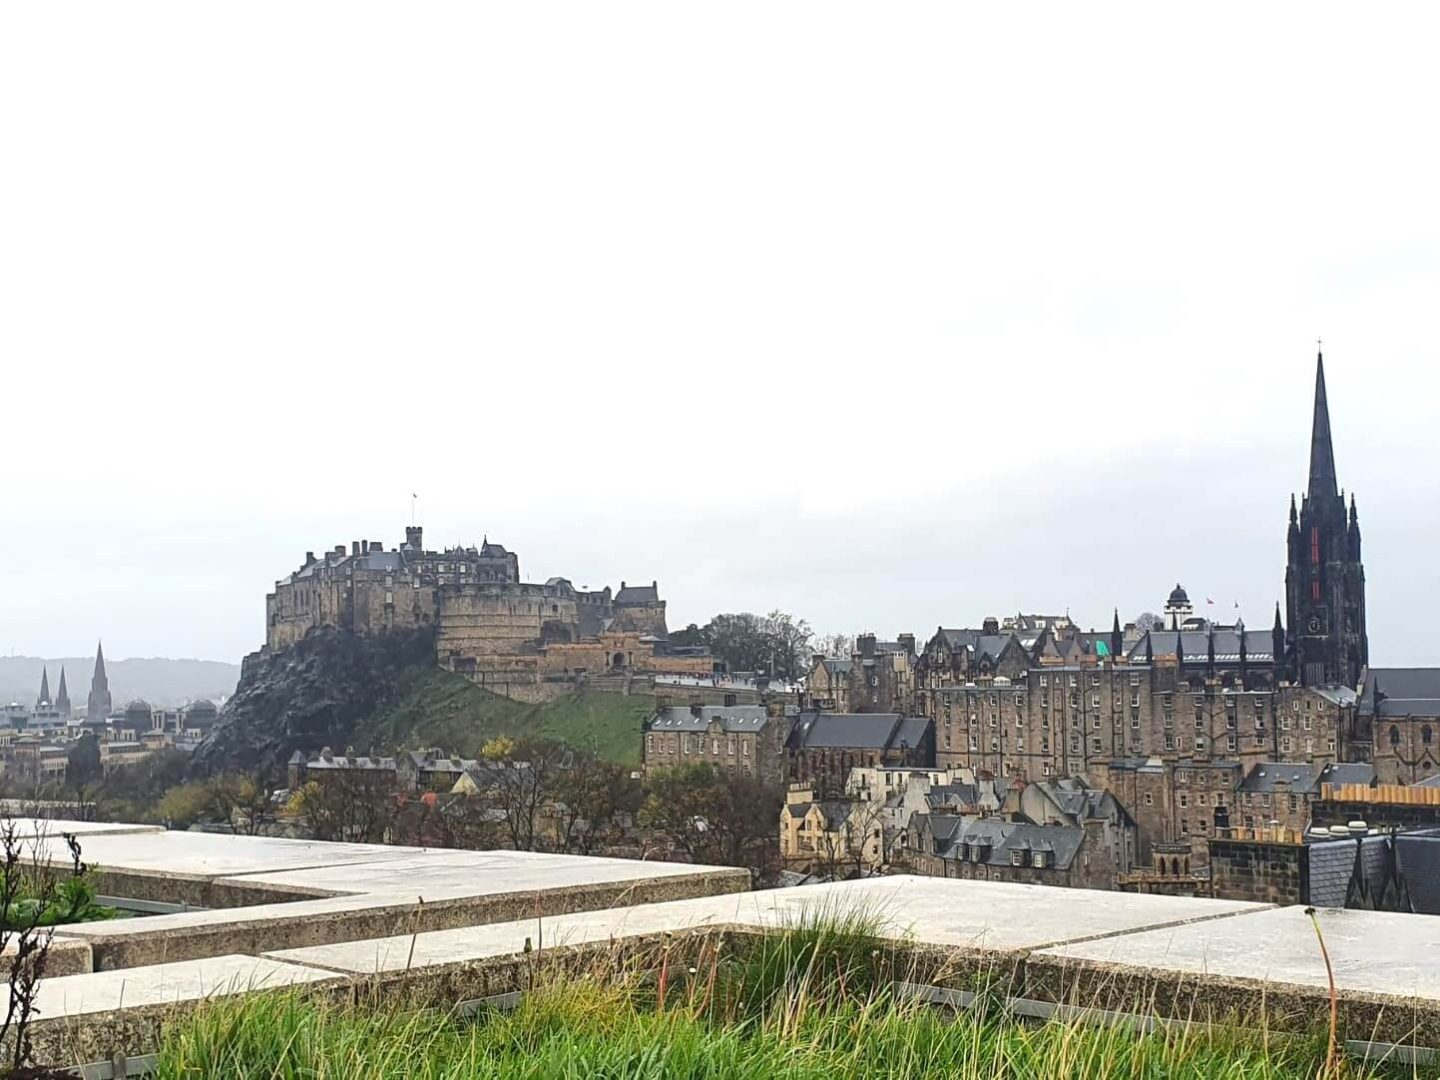 The view of Edinburgh castle from a nearby rooftop.